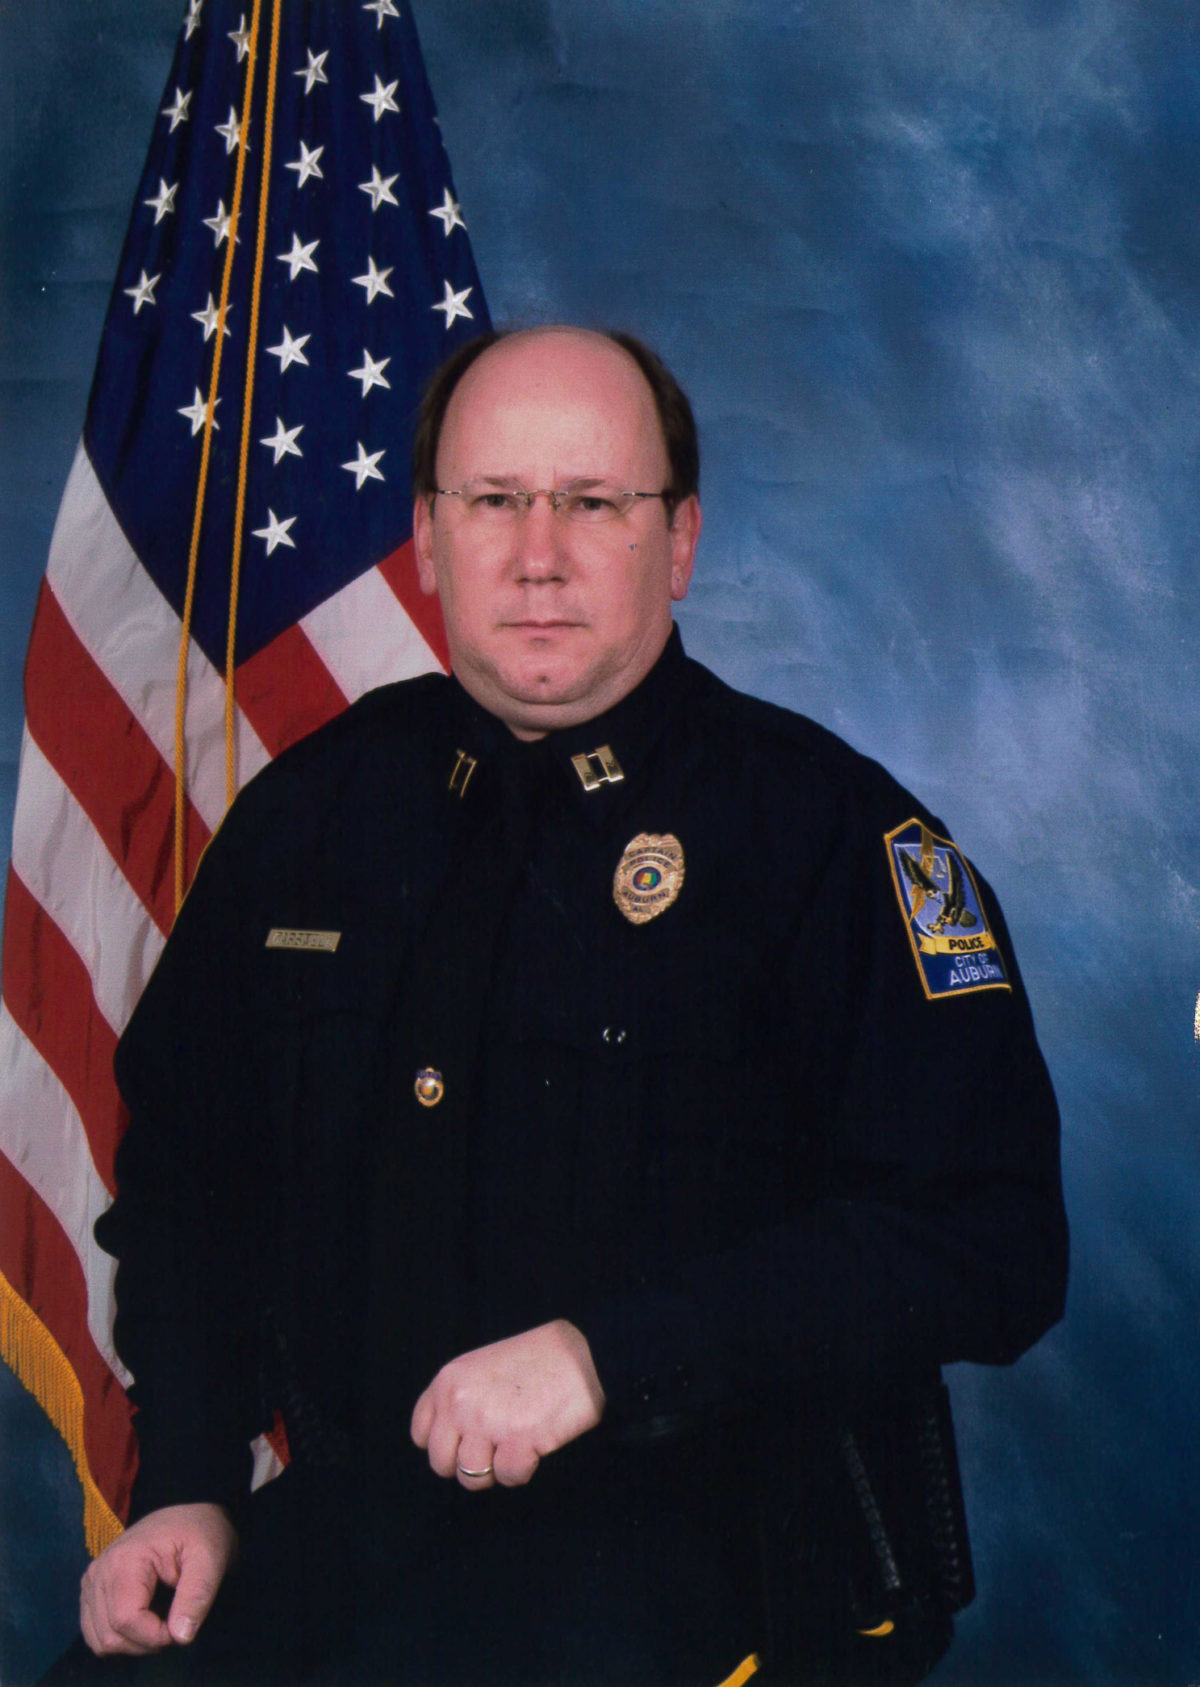 Tommy Carswell poses in front of the United States of America flag wearing his police captain uniform.